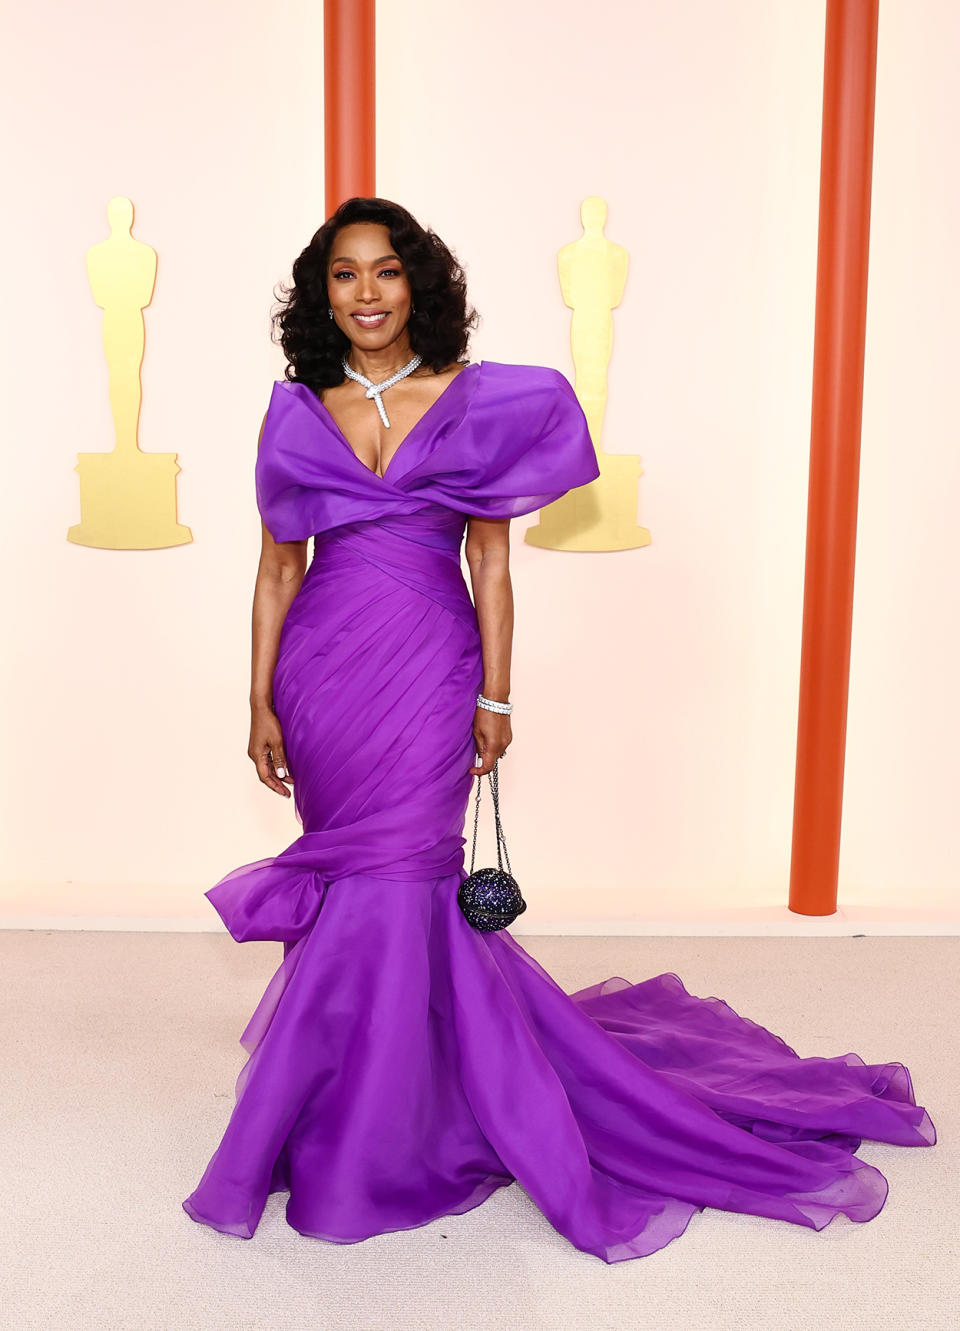 Angela Bassett is the first actor to be nominated for an Oscar for a Marvel film. Photo: Getty